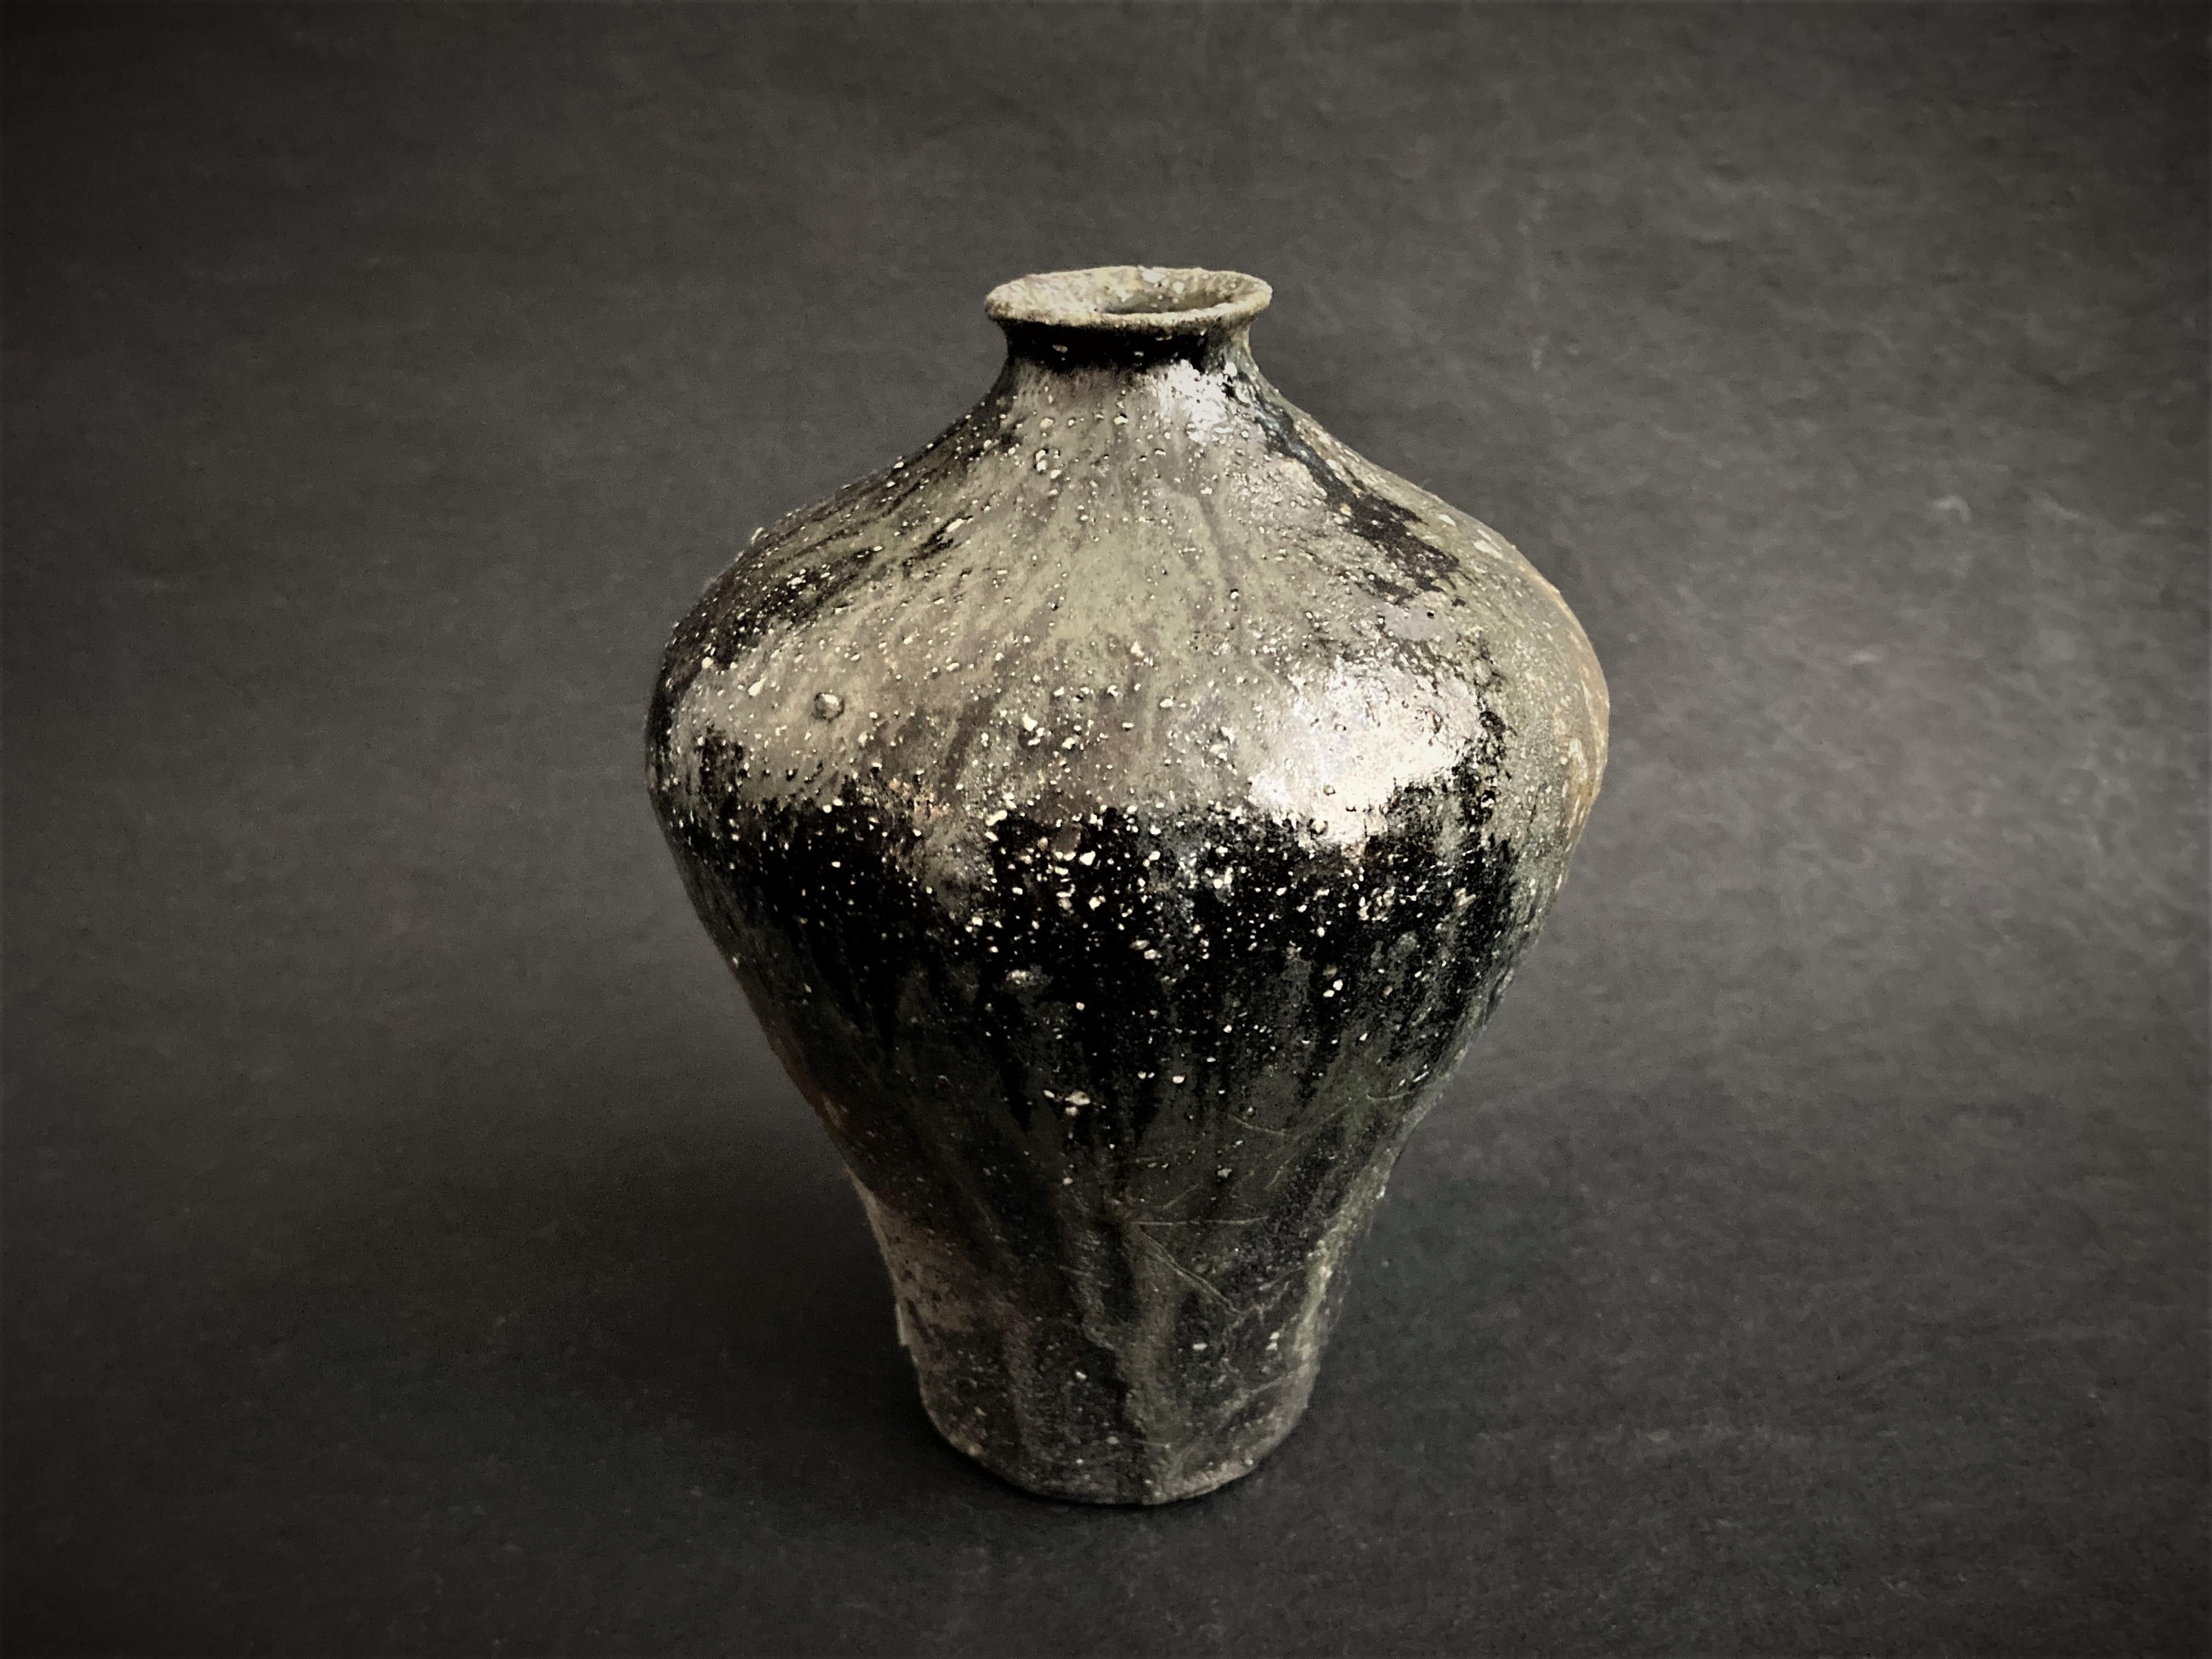 Small unglazed flower vase by Toru Hatta
Limited Edition of 3
Dimensions: Diameter 11 x height 18 cm
Material: Handmade ceramic. Unglazed. 

Lead time may vary. Please contact us.


Toru Hatta was both in Kanazawa in 1977. His love of antiques and